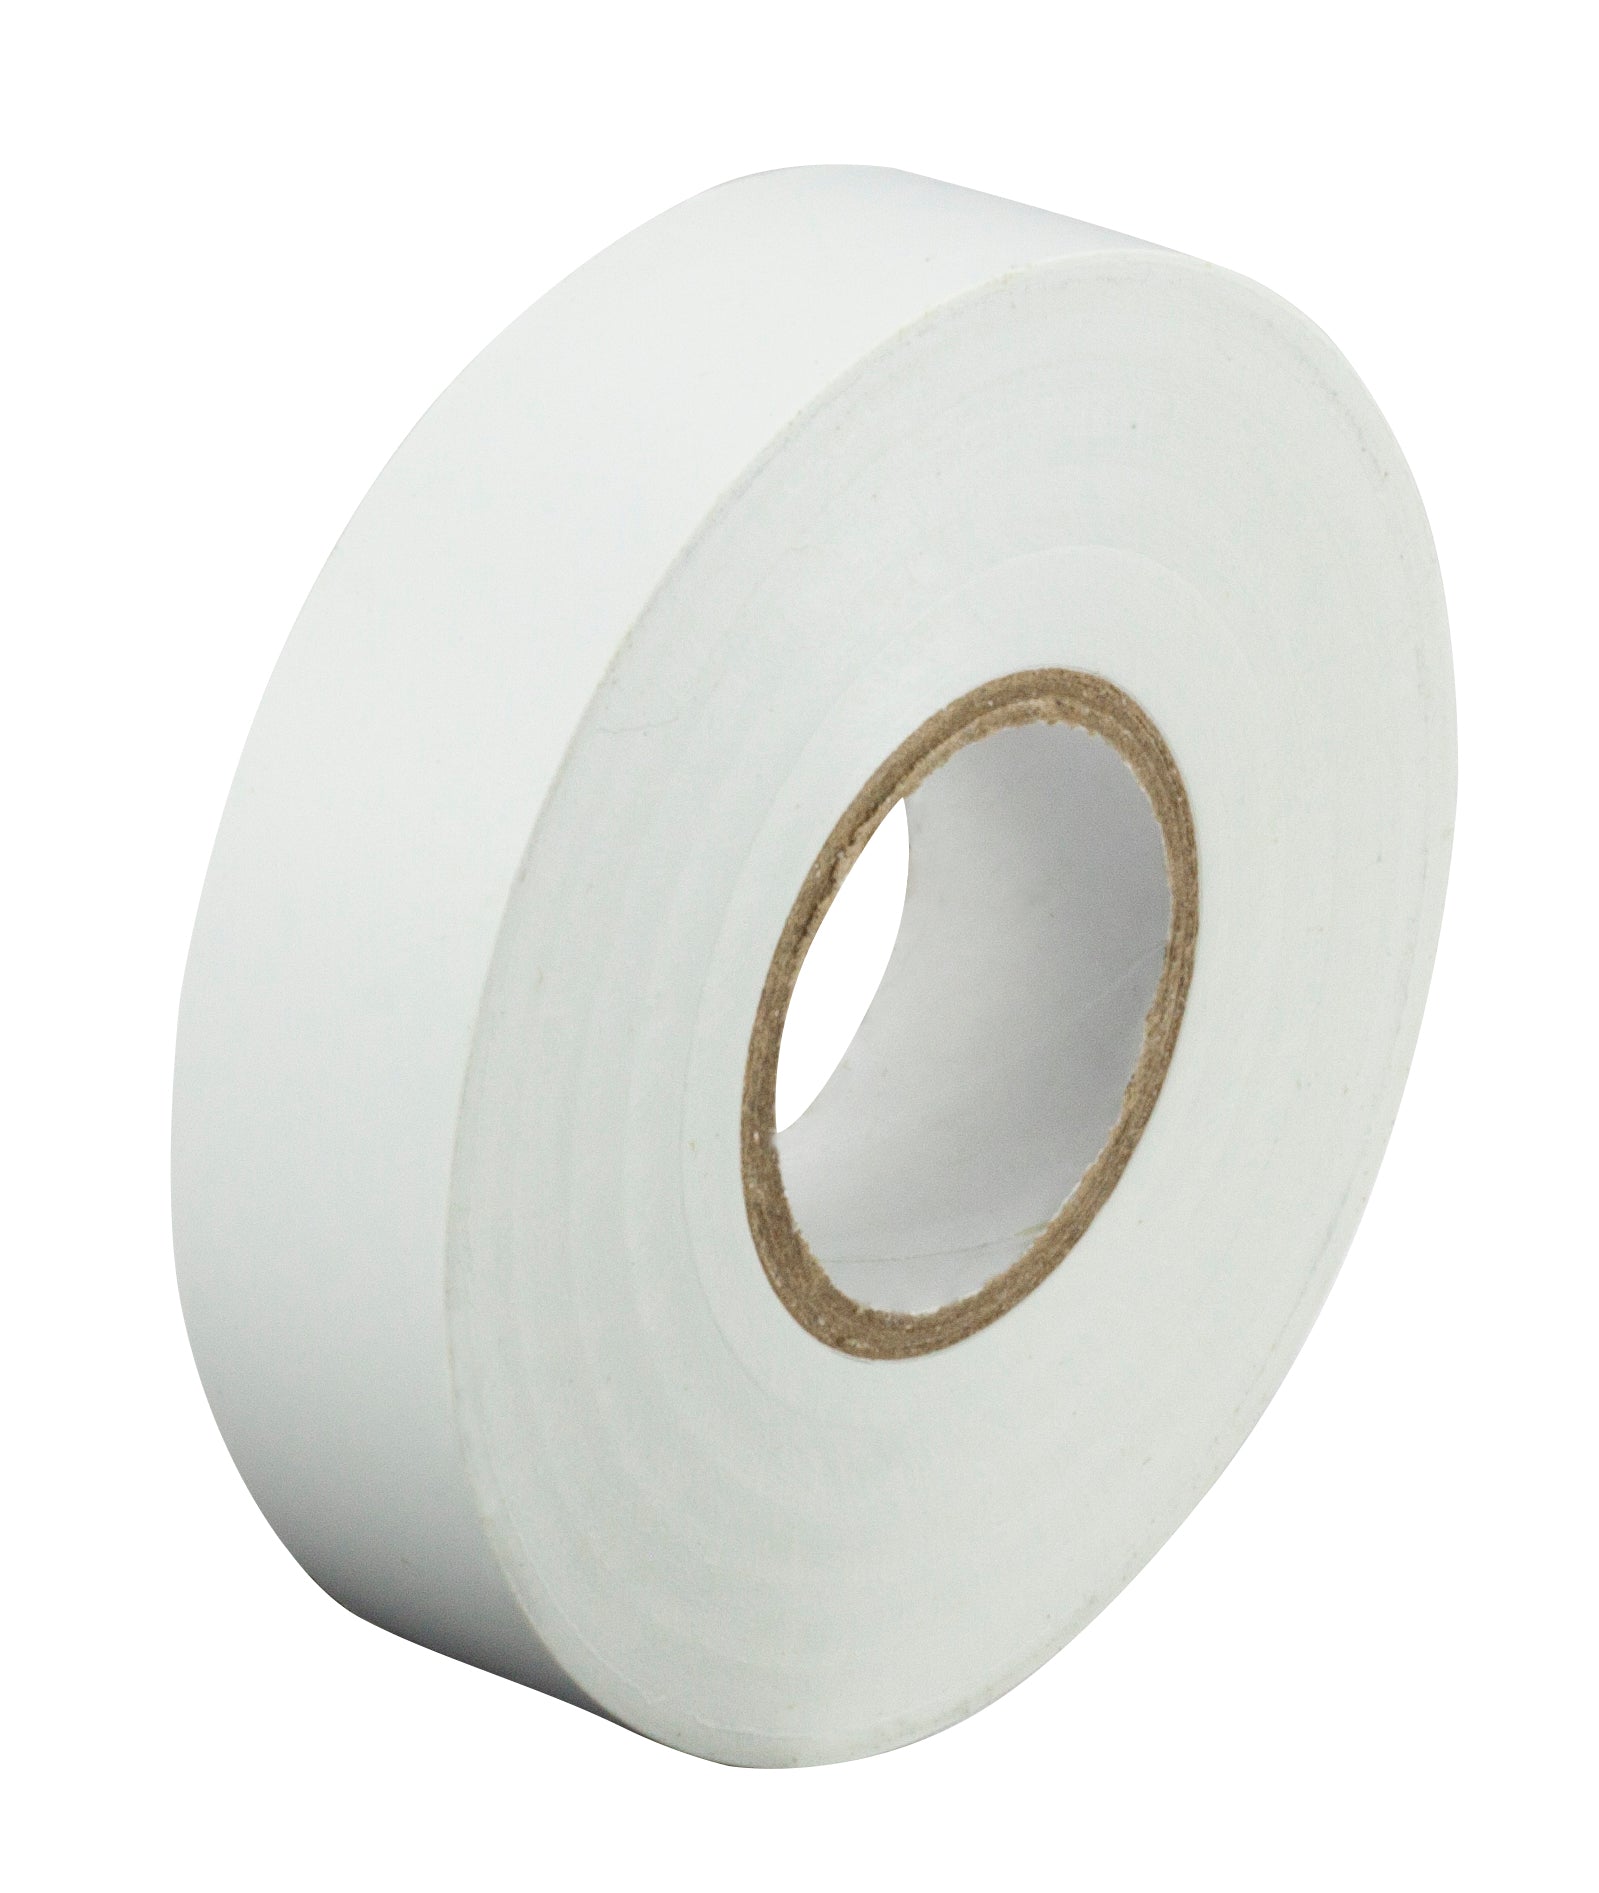 PVC Tape Size: 19mmx33m Roll - White - Pack of 10